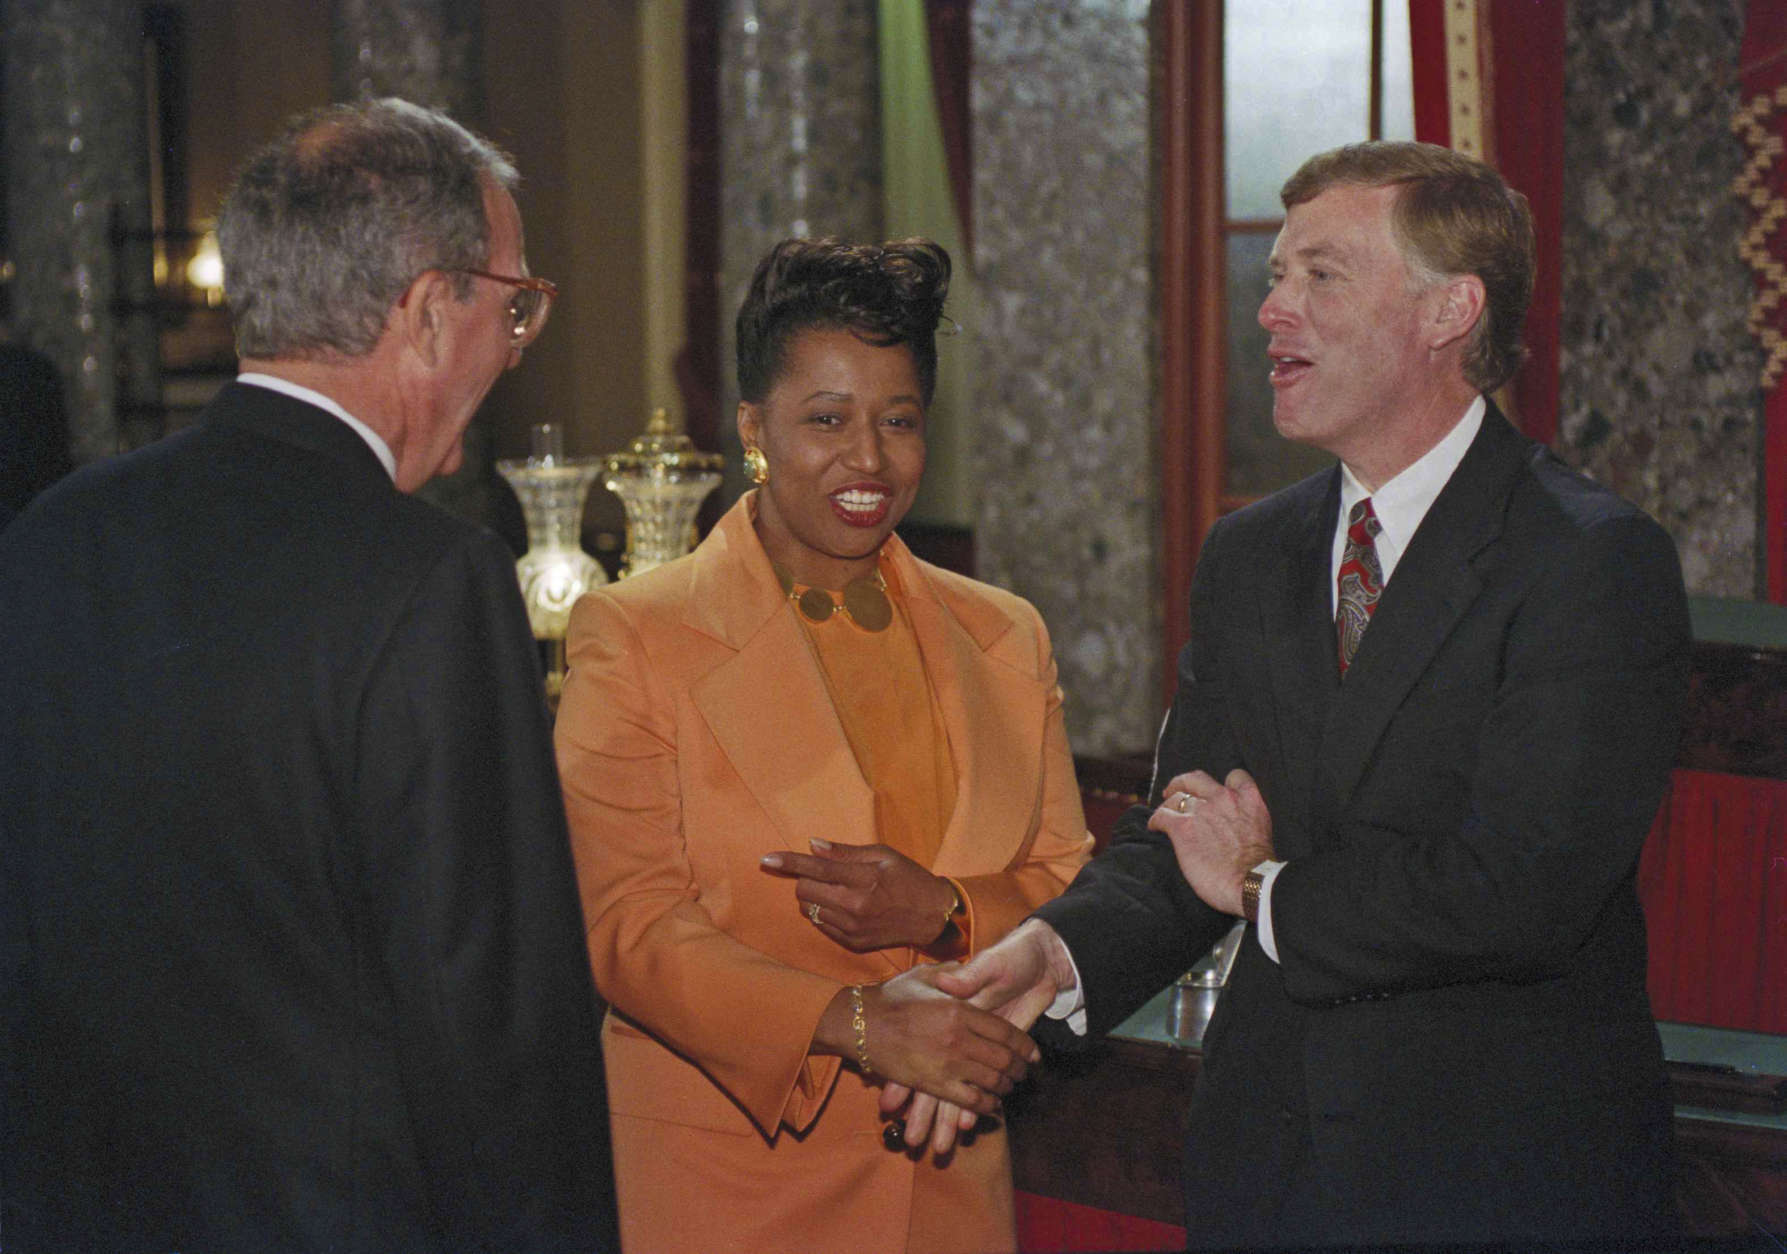 Carol Moseley Braun, D-Illinois, shakes hands with Vice President Dan Quayle after reenacting the taking of the Senate oath on Capitol Hill, January 5, 1993. Senate Majority Leader George Mitchell of Maine, looks on at left. Braun became the first black woman to become a member of the Senate. ( AP Photo/ Ron Edmonds )